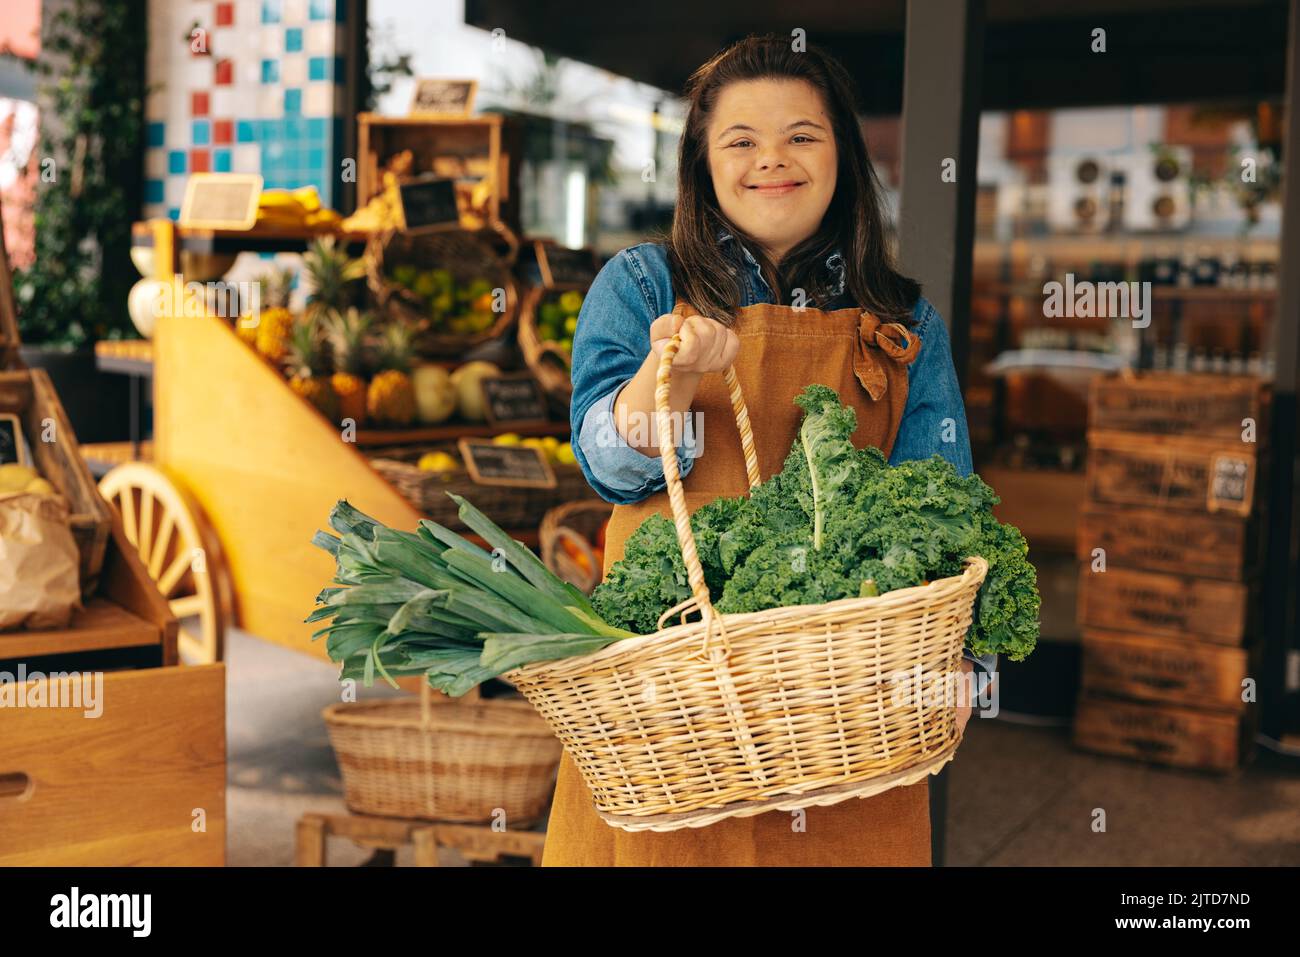 Supermarket employee with Down syndrome holding a basket of fresh organic vegetables in a grocery store. Happy woman with an intellectual disability w Stock Photo